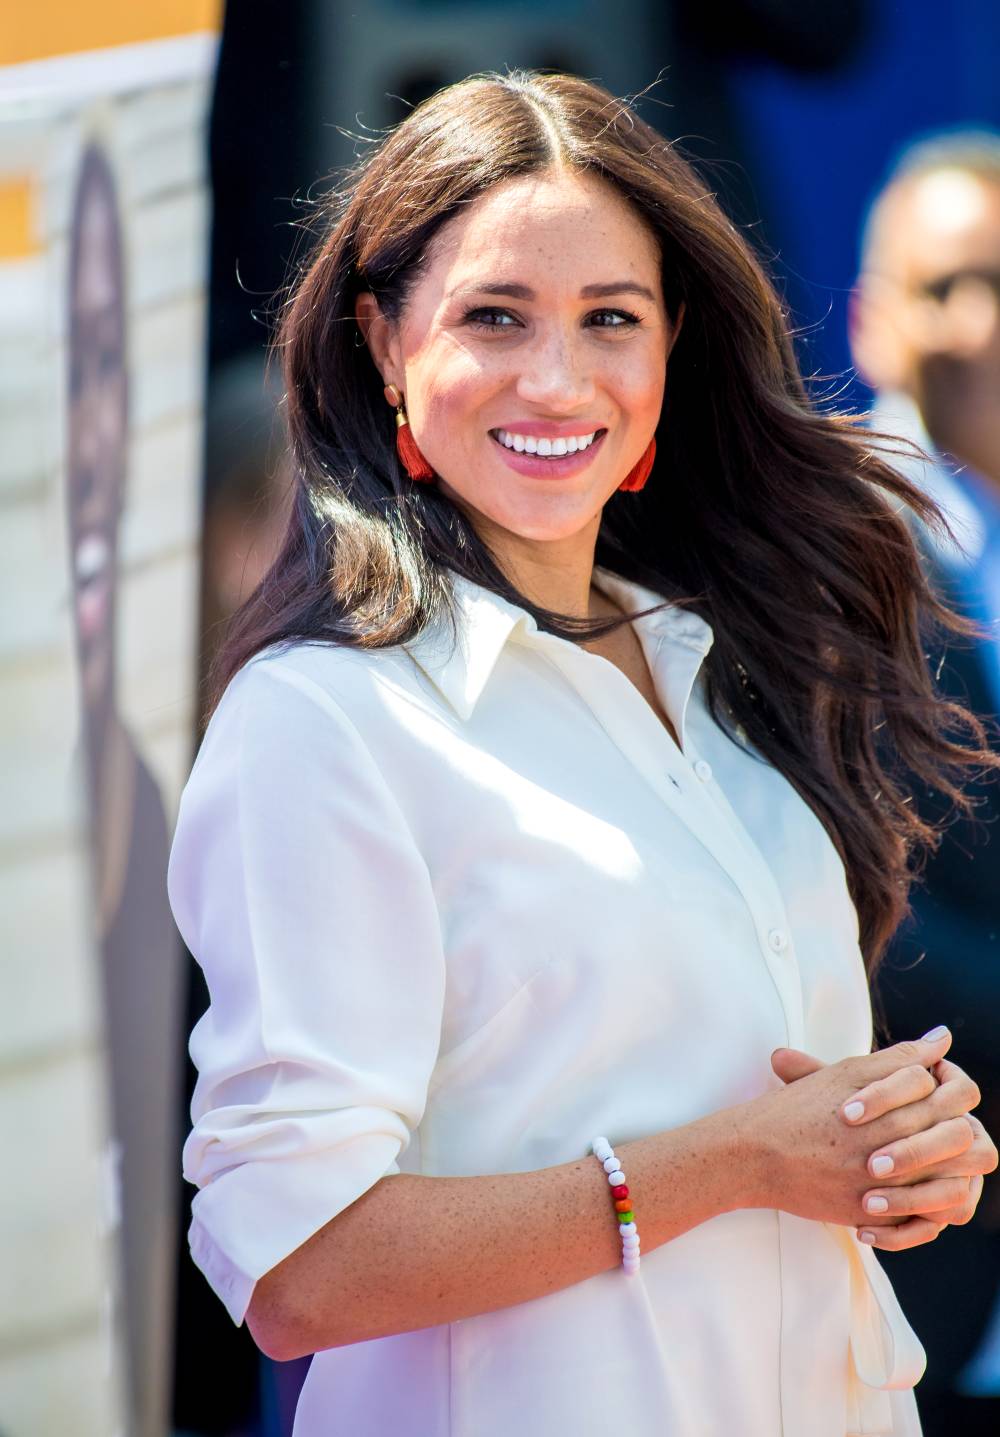 Pregnant Meghan Markle Is ‘Feeling Great’ While Awaiting 2nd Child’s Arrival